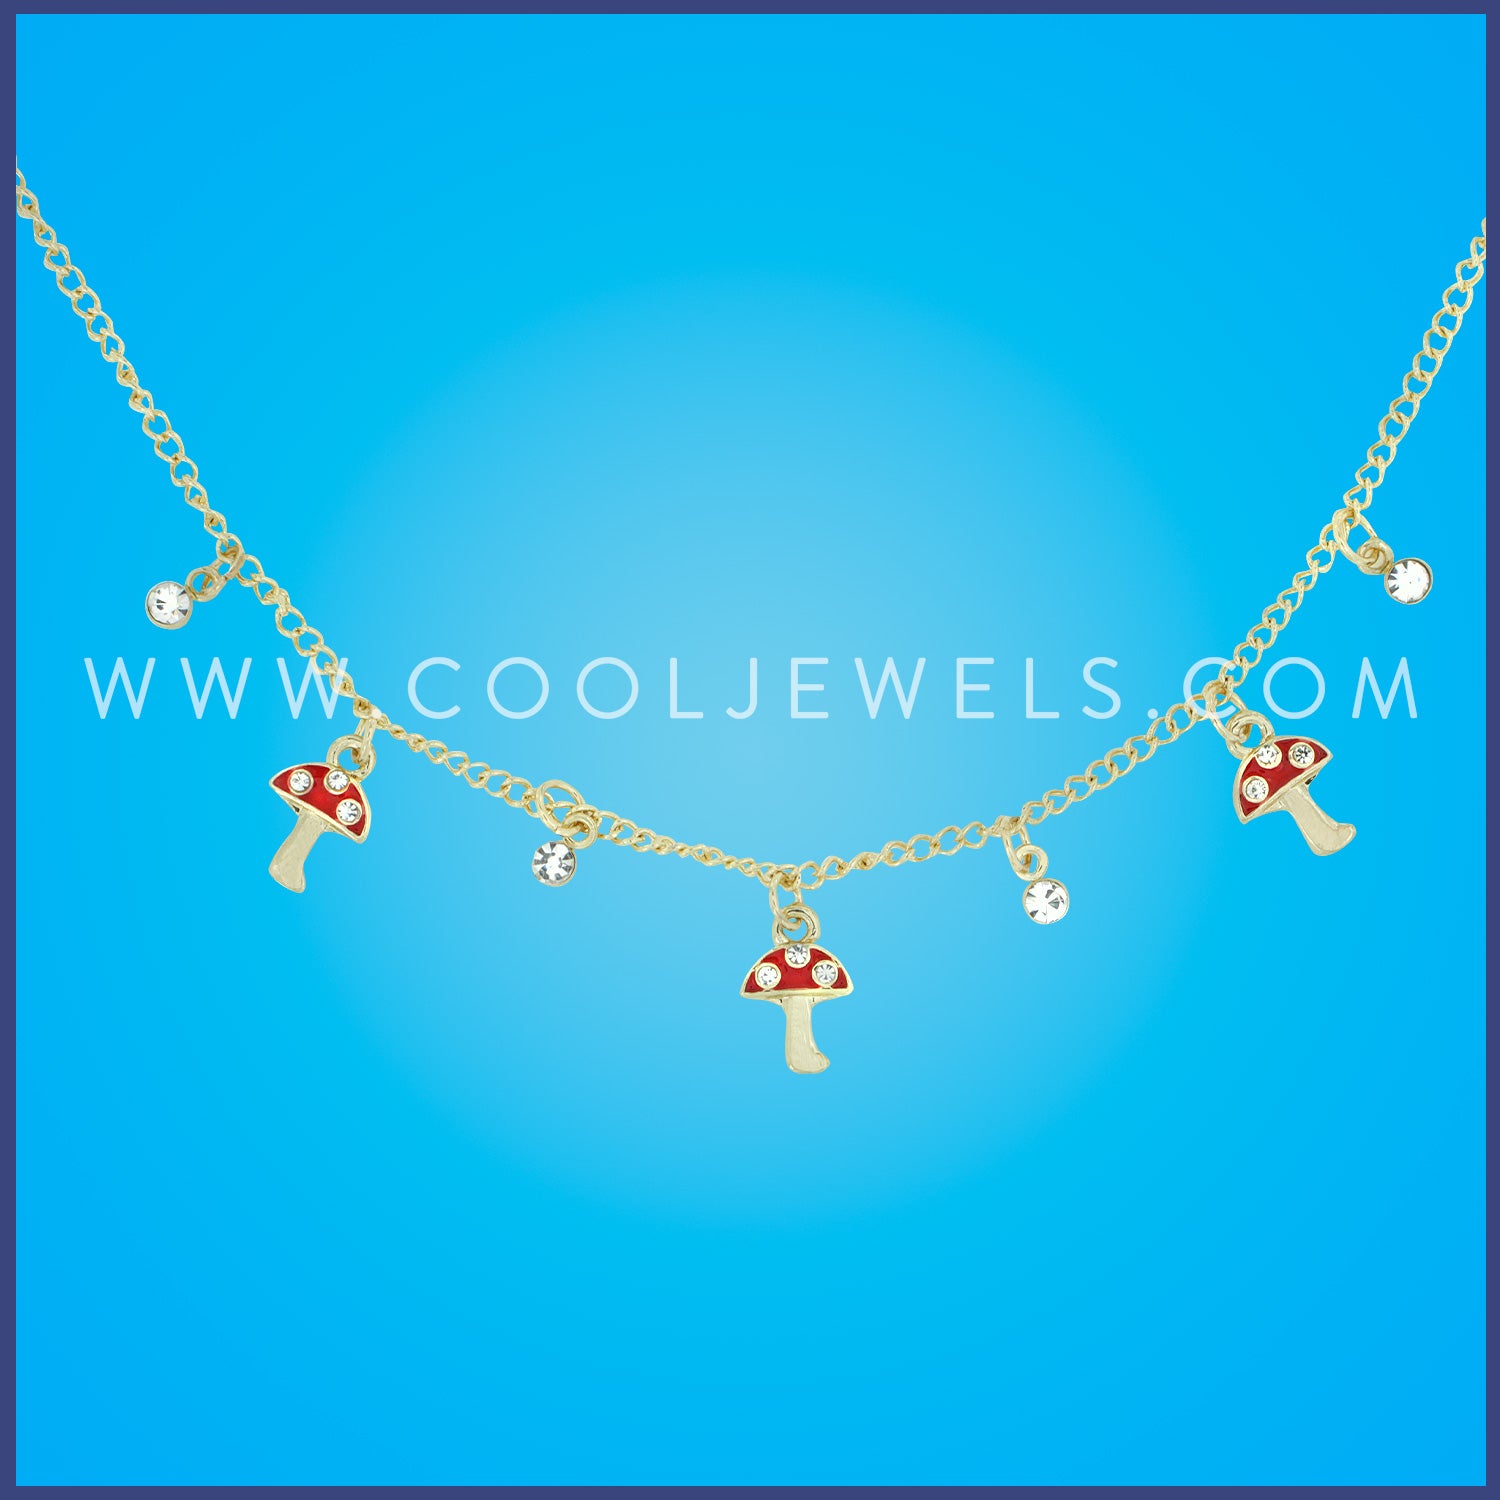 GOLD LINK CHAIN NECKLACE WITH RHINESTONES & MUSHROOM PENDANT